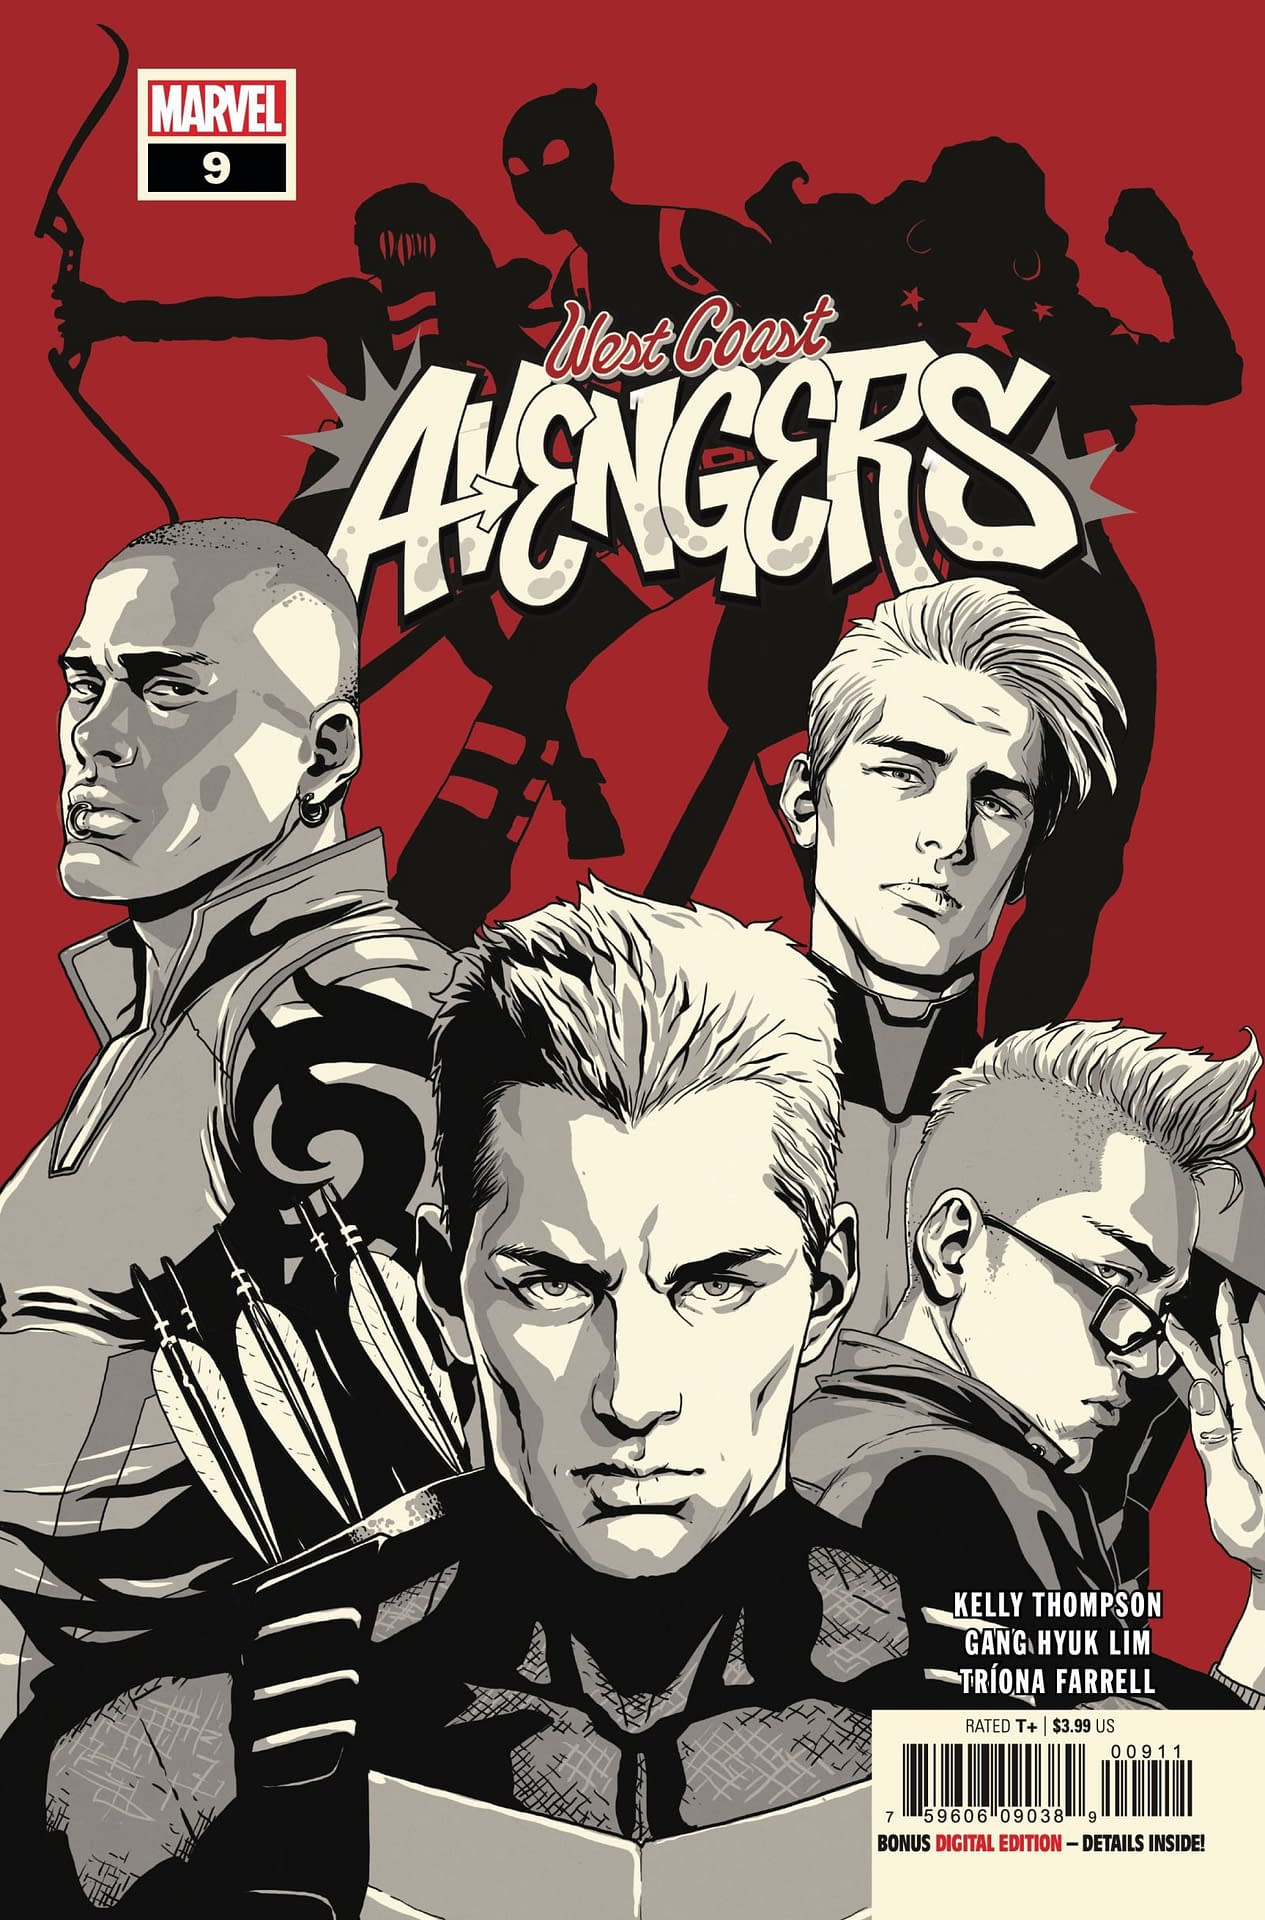 The Avengers Need an Image Consultant in Next Week's West Coast Avengers #9